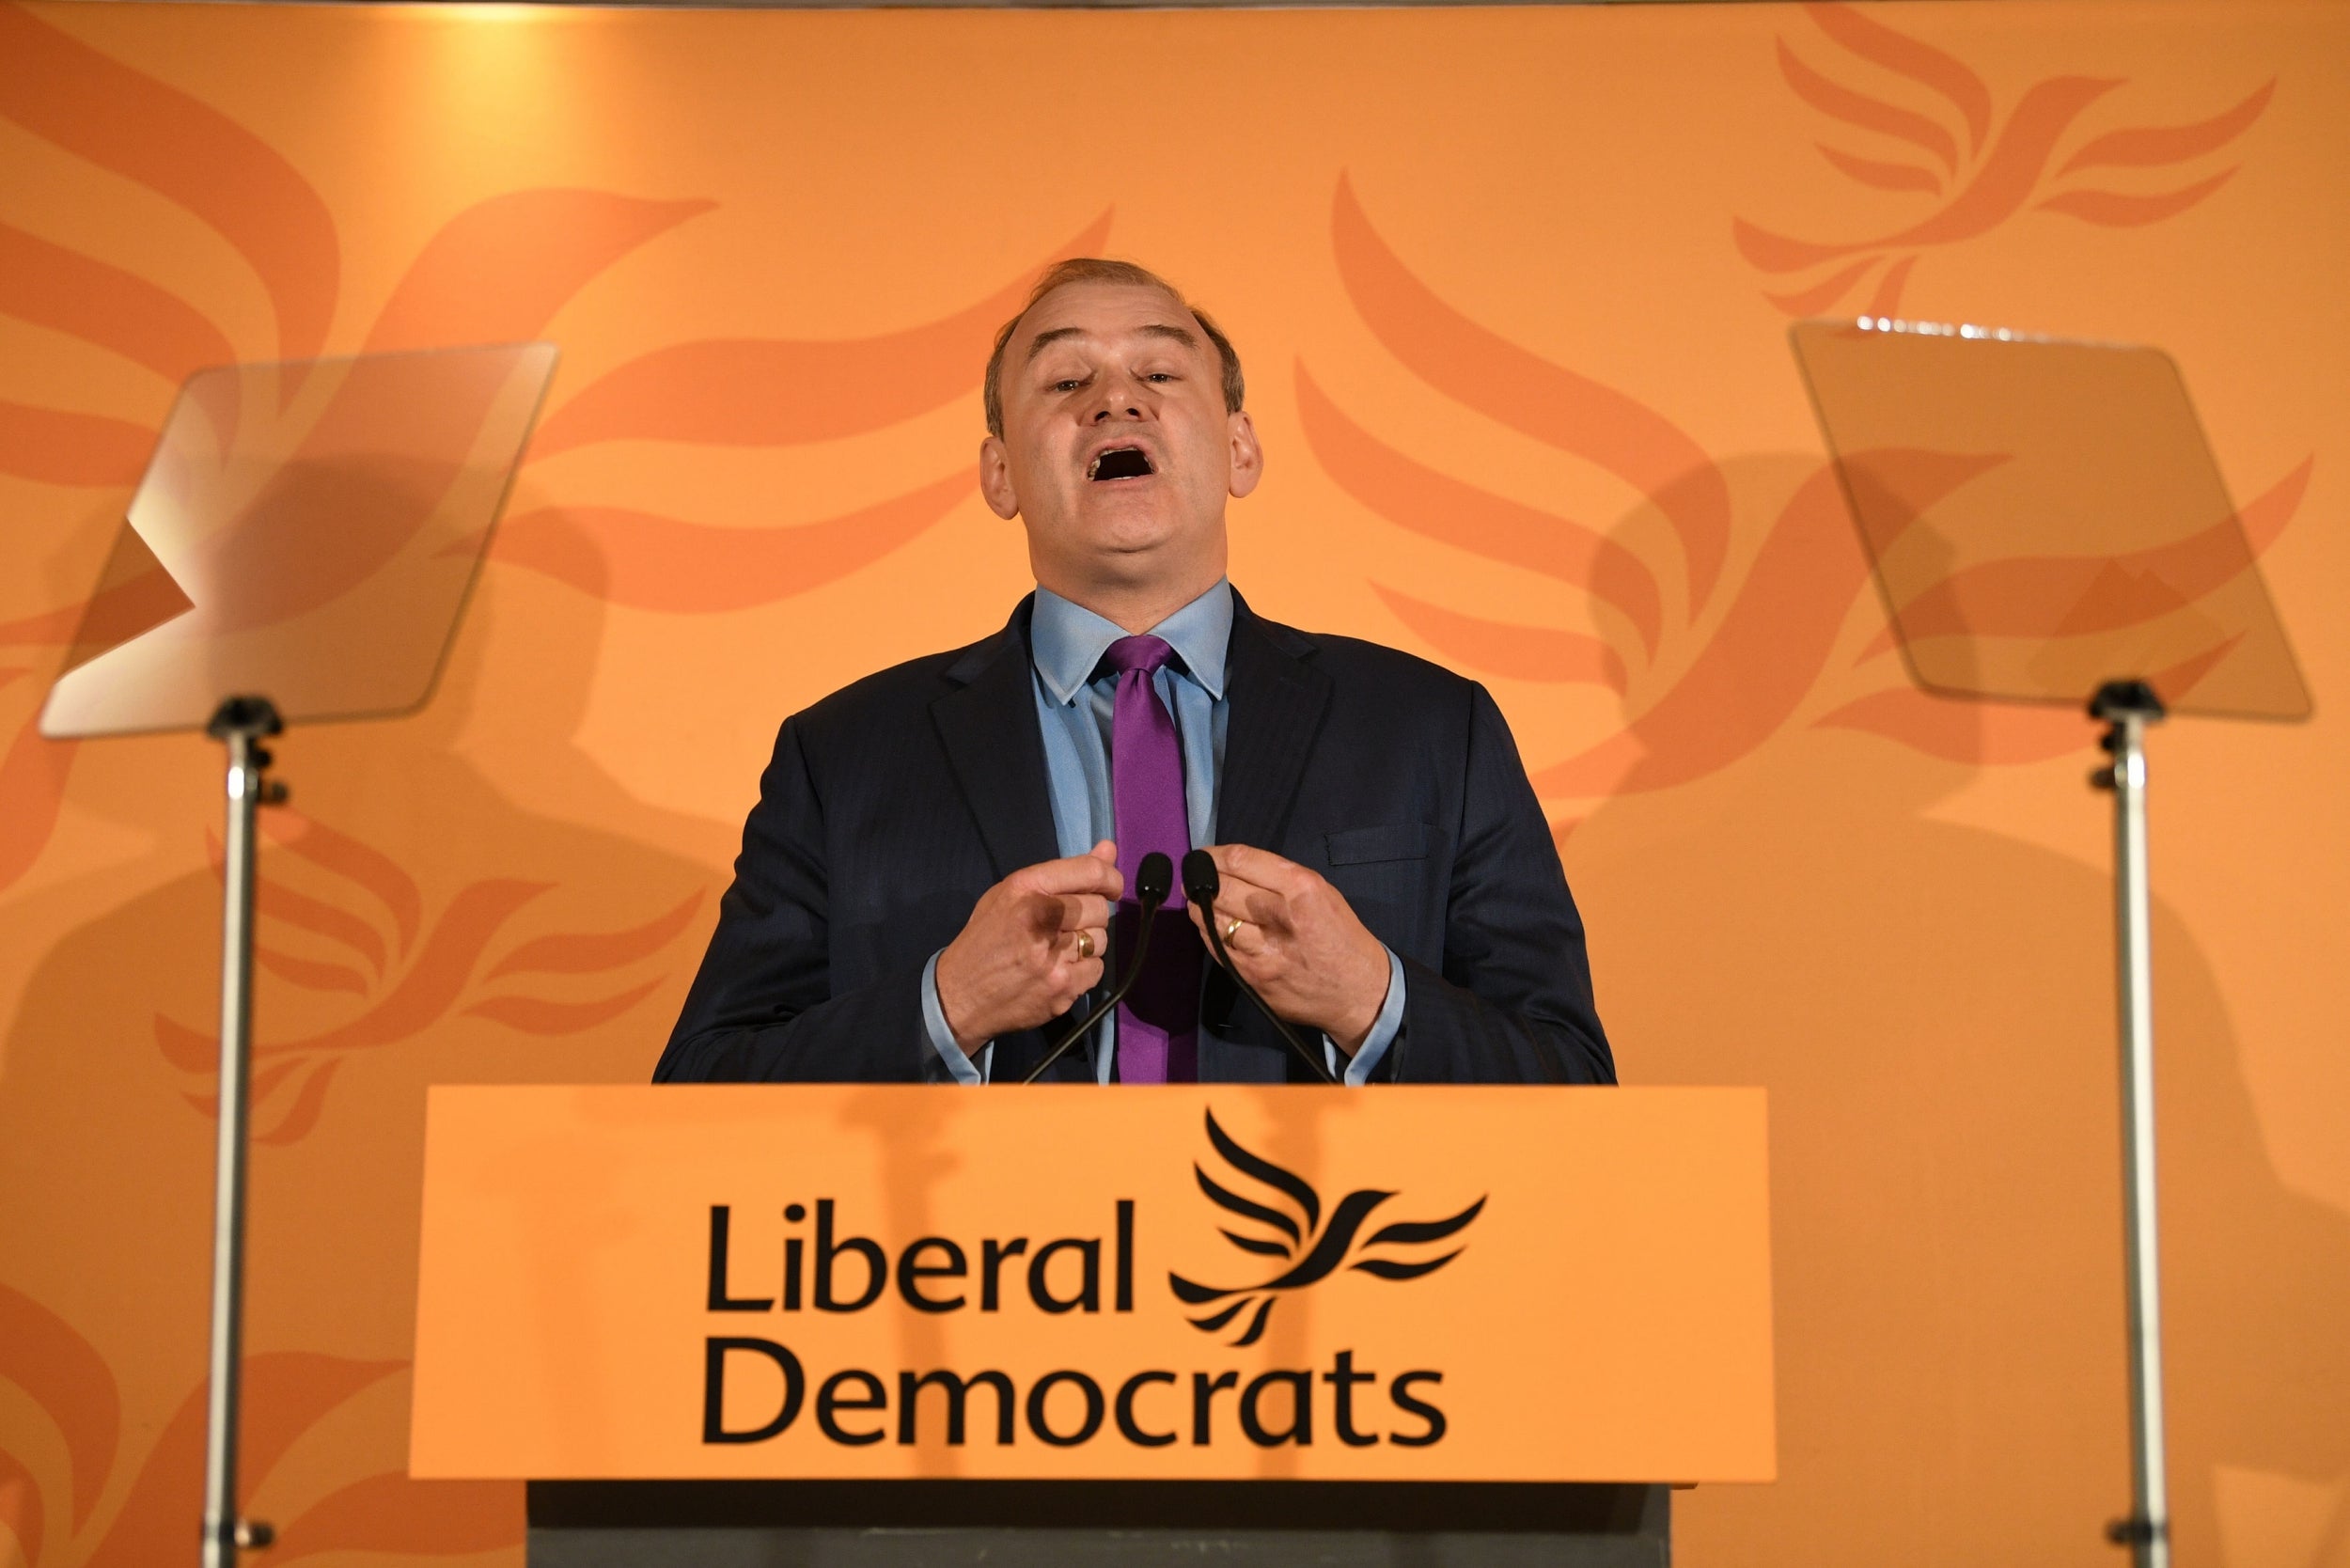 Liberal Democrats election Ed Davey announced as new leader The